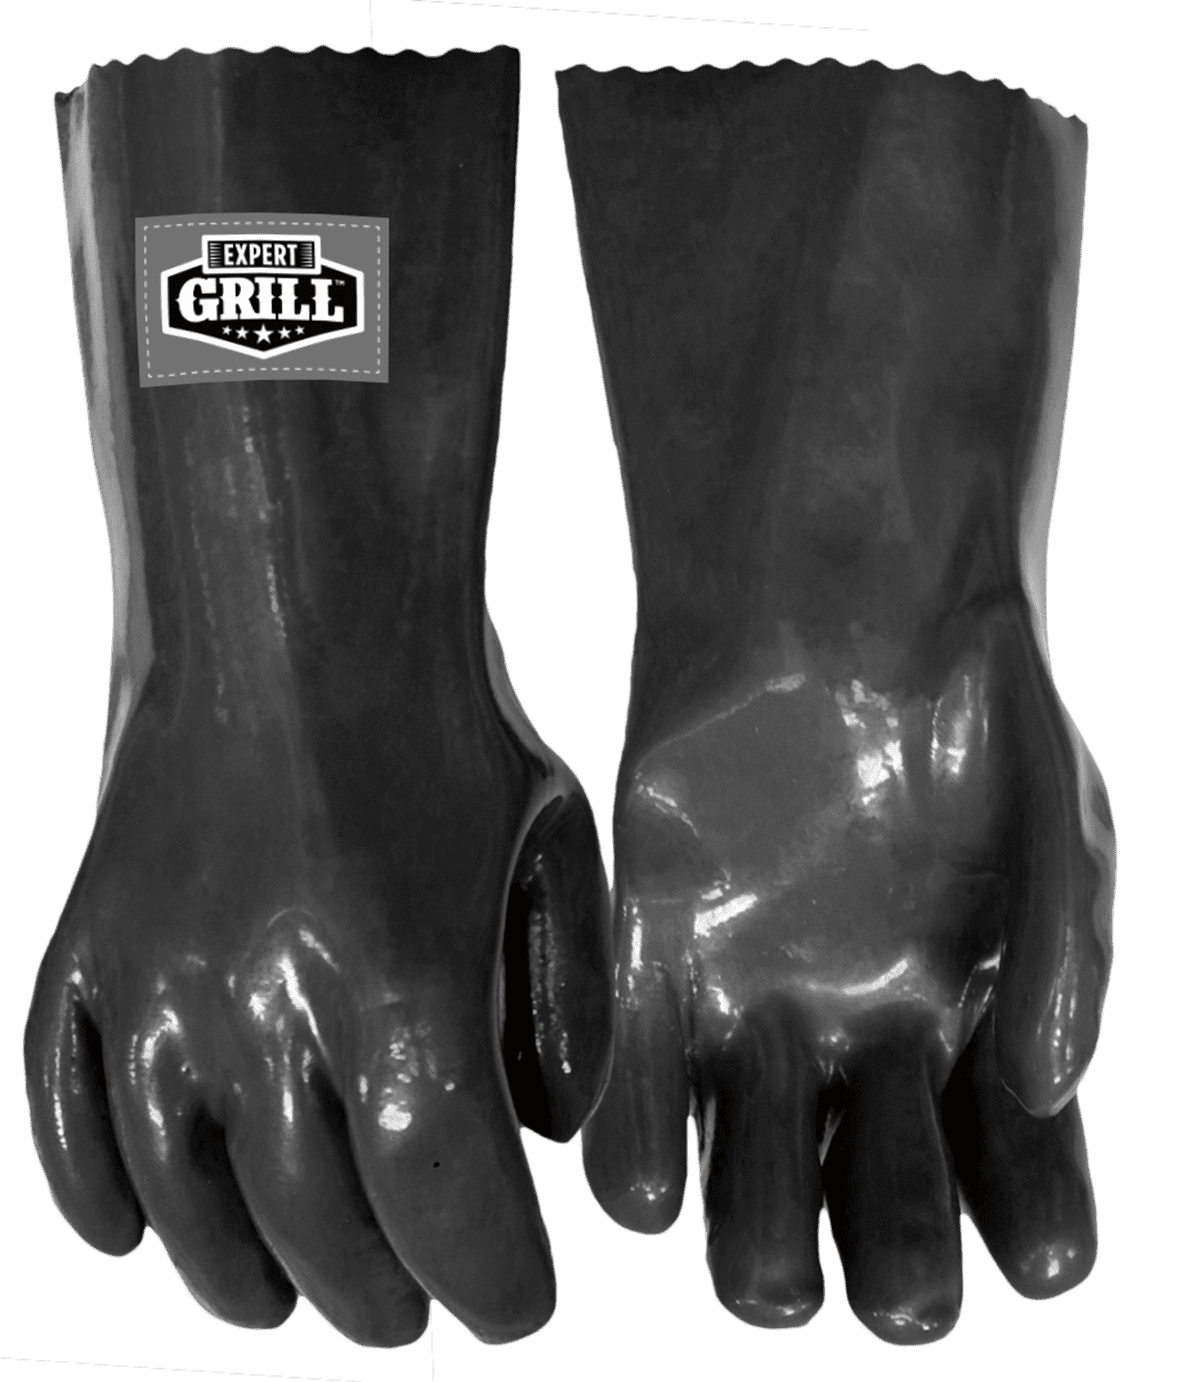 Expert Grill Silicone Dotted Heat Resistant BBQ Gloves, Black Color, One Size